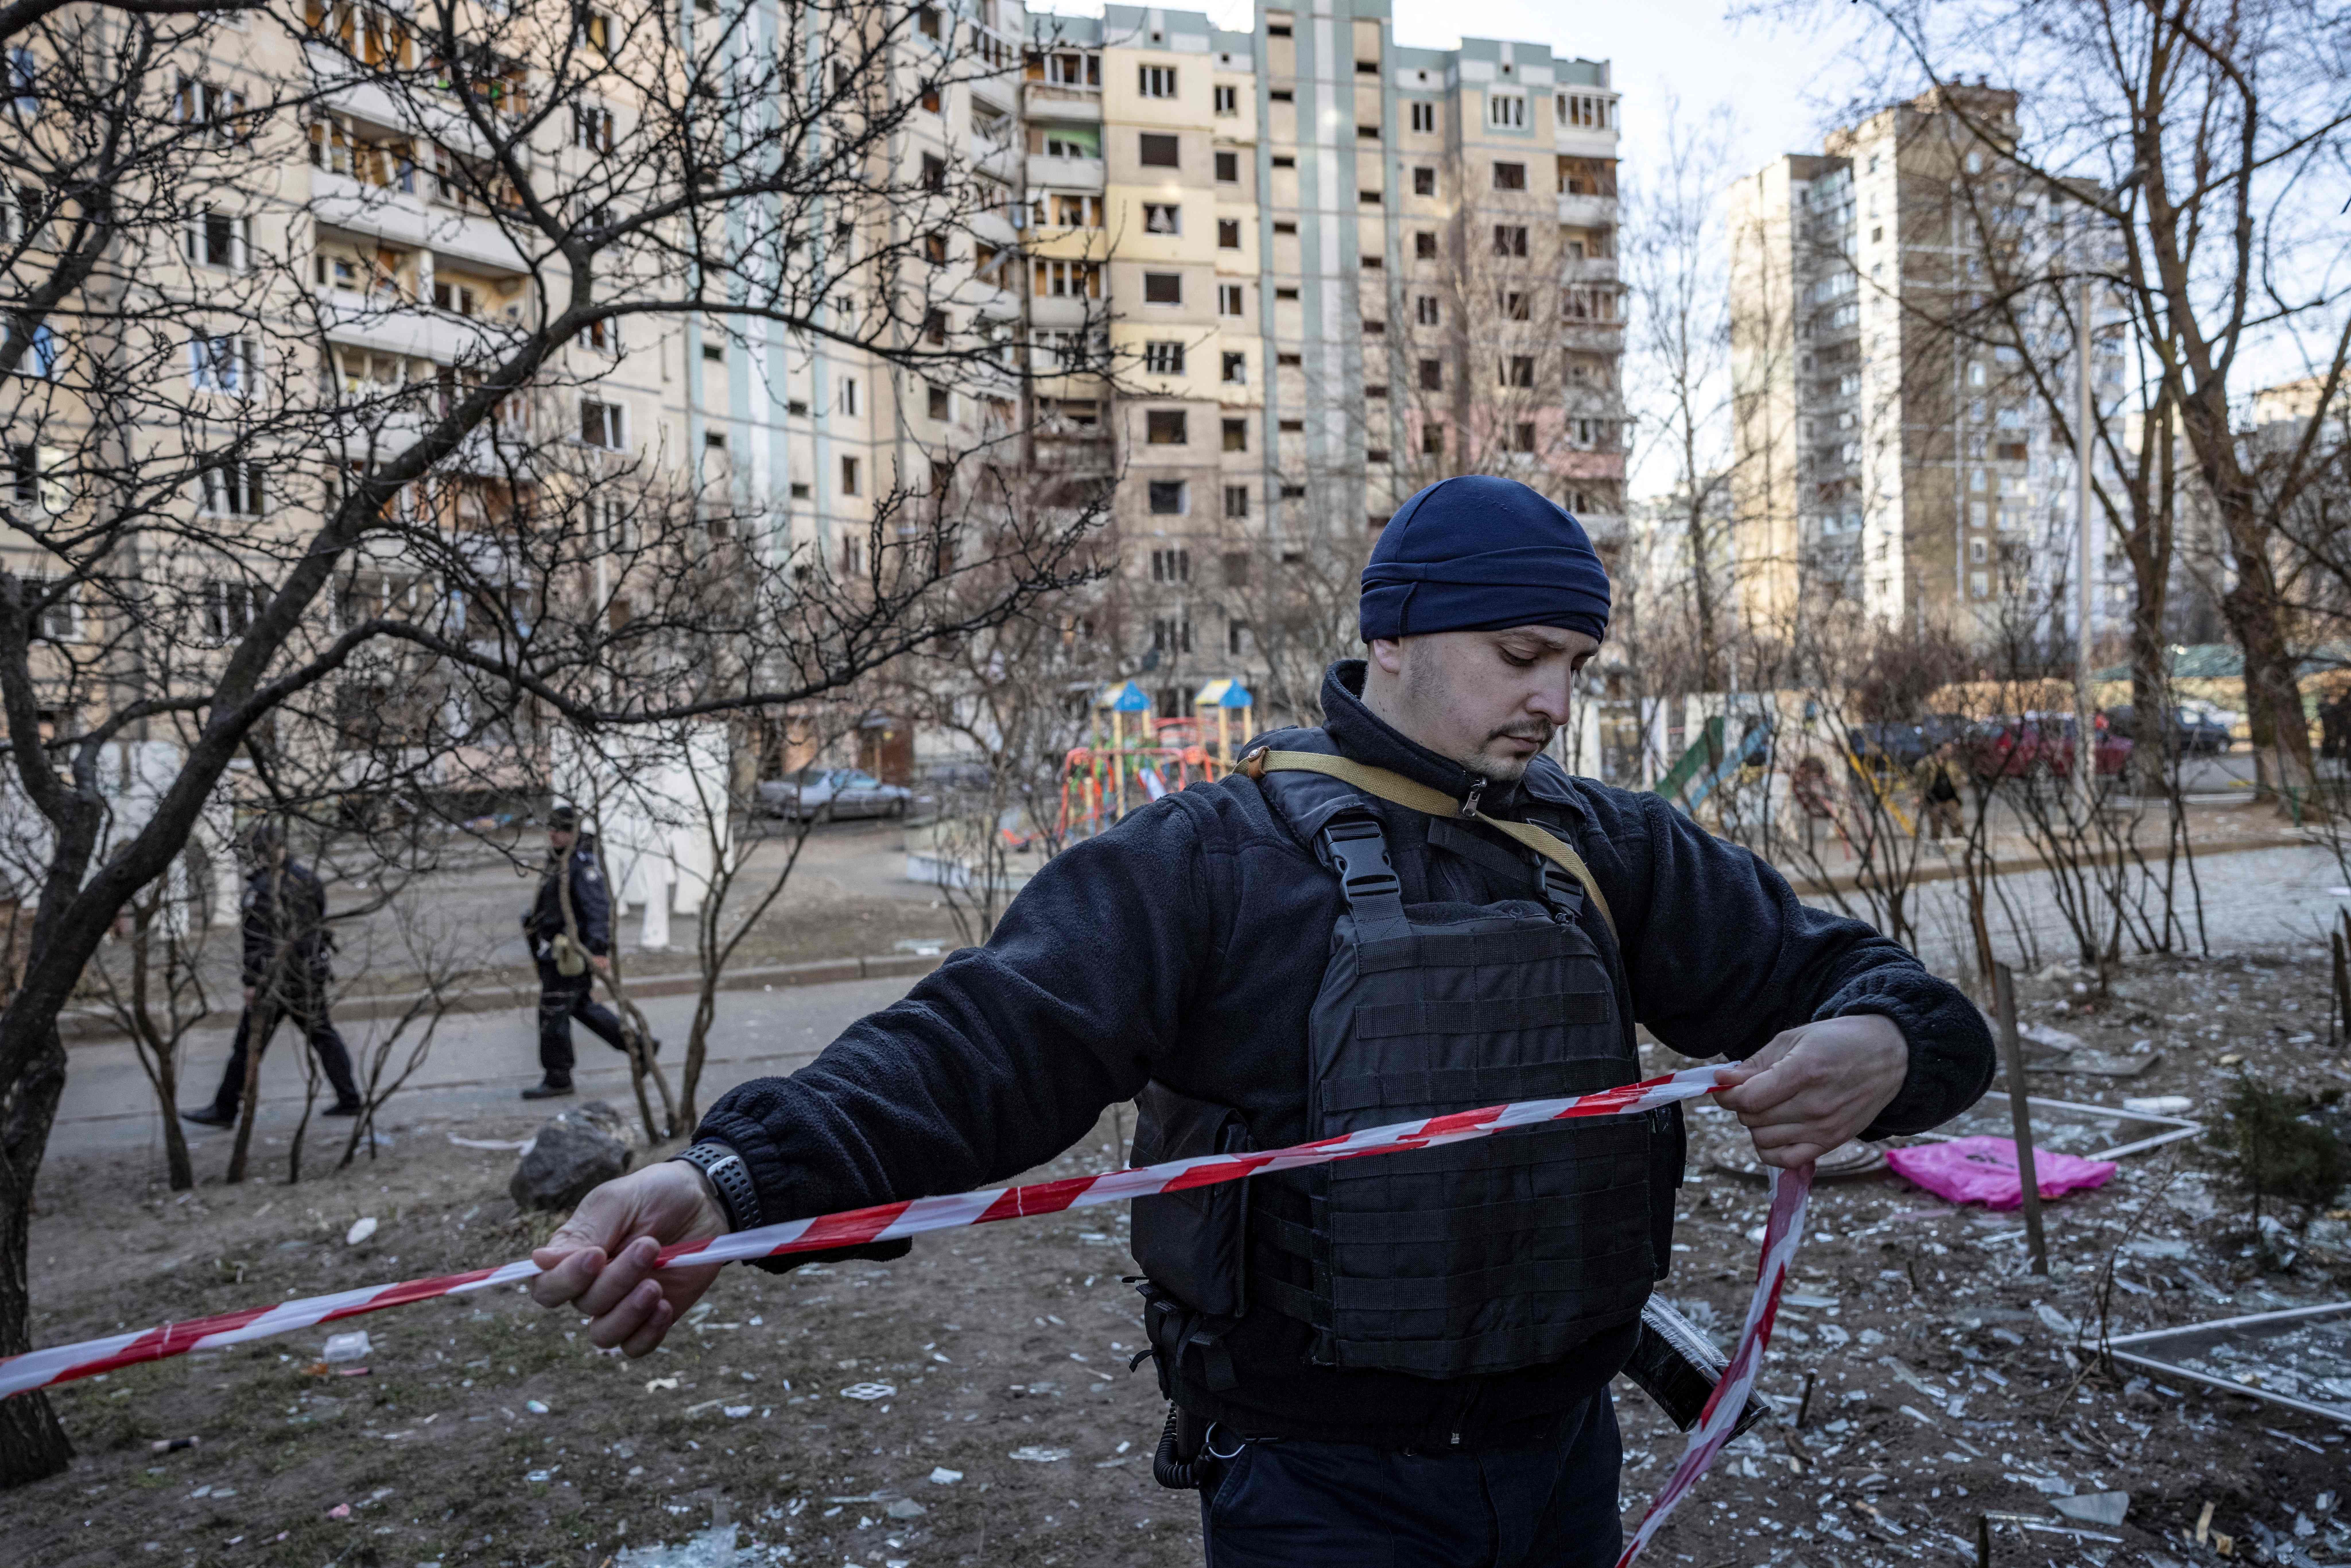 A Ukrainian police officer cordons off an area near a residential building which was hit by the debris from a downed rocket, in Kyiv, on March 20.